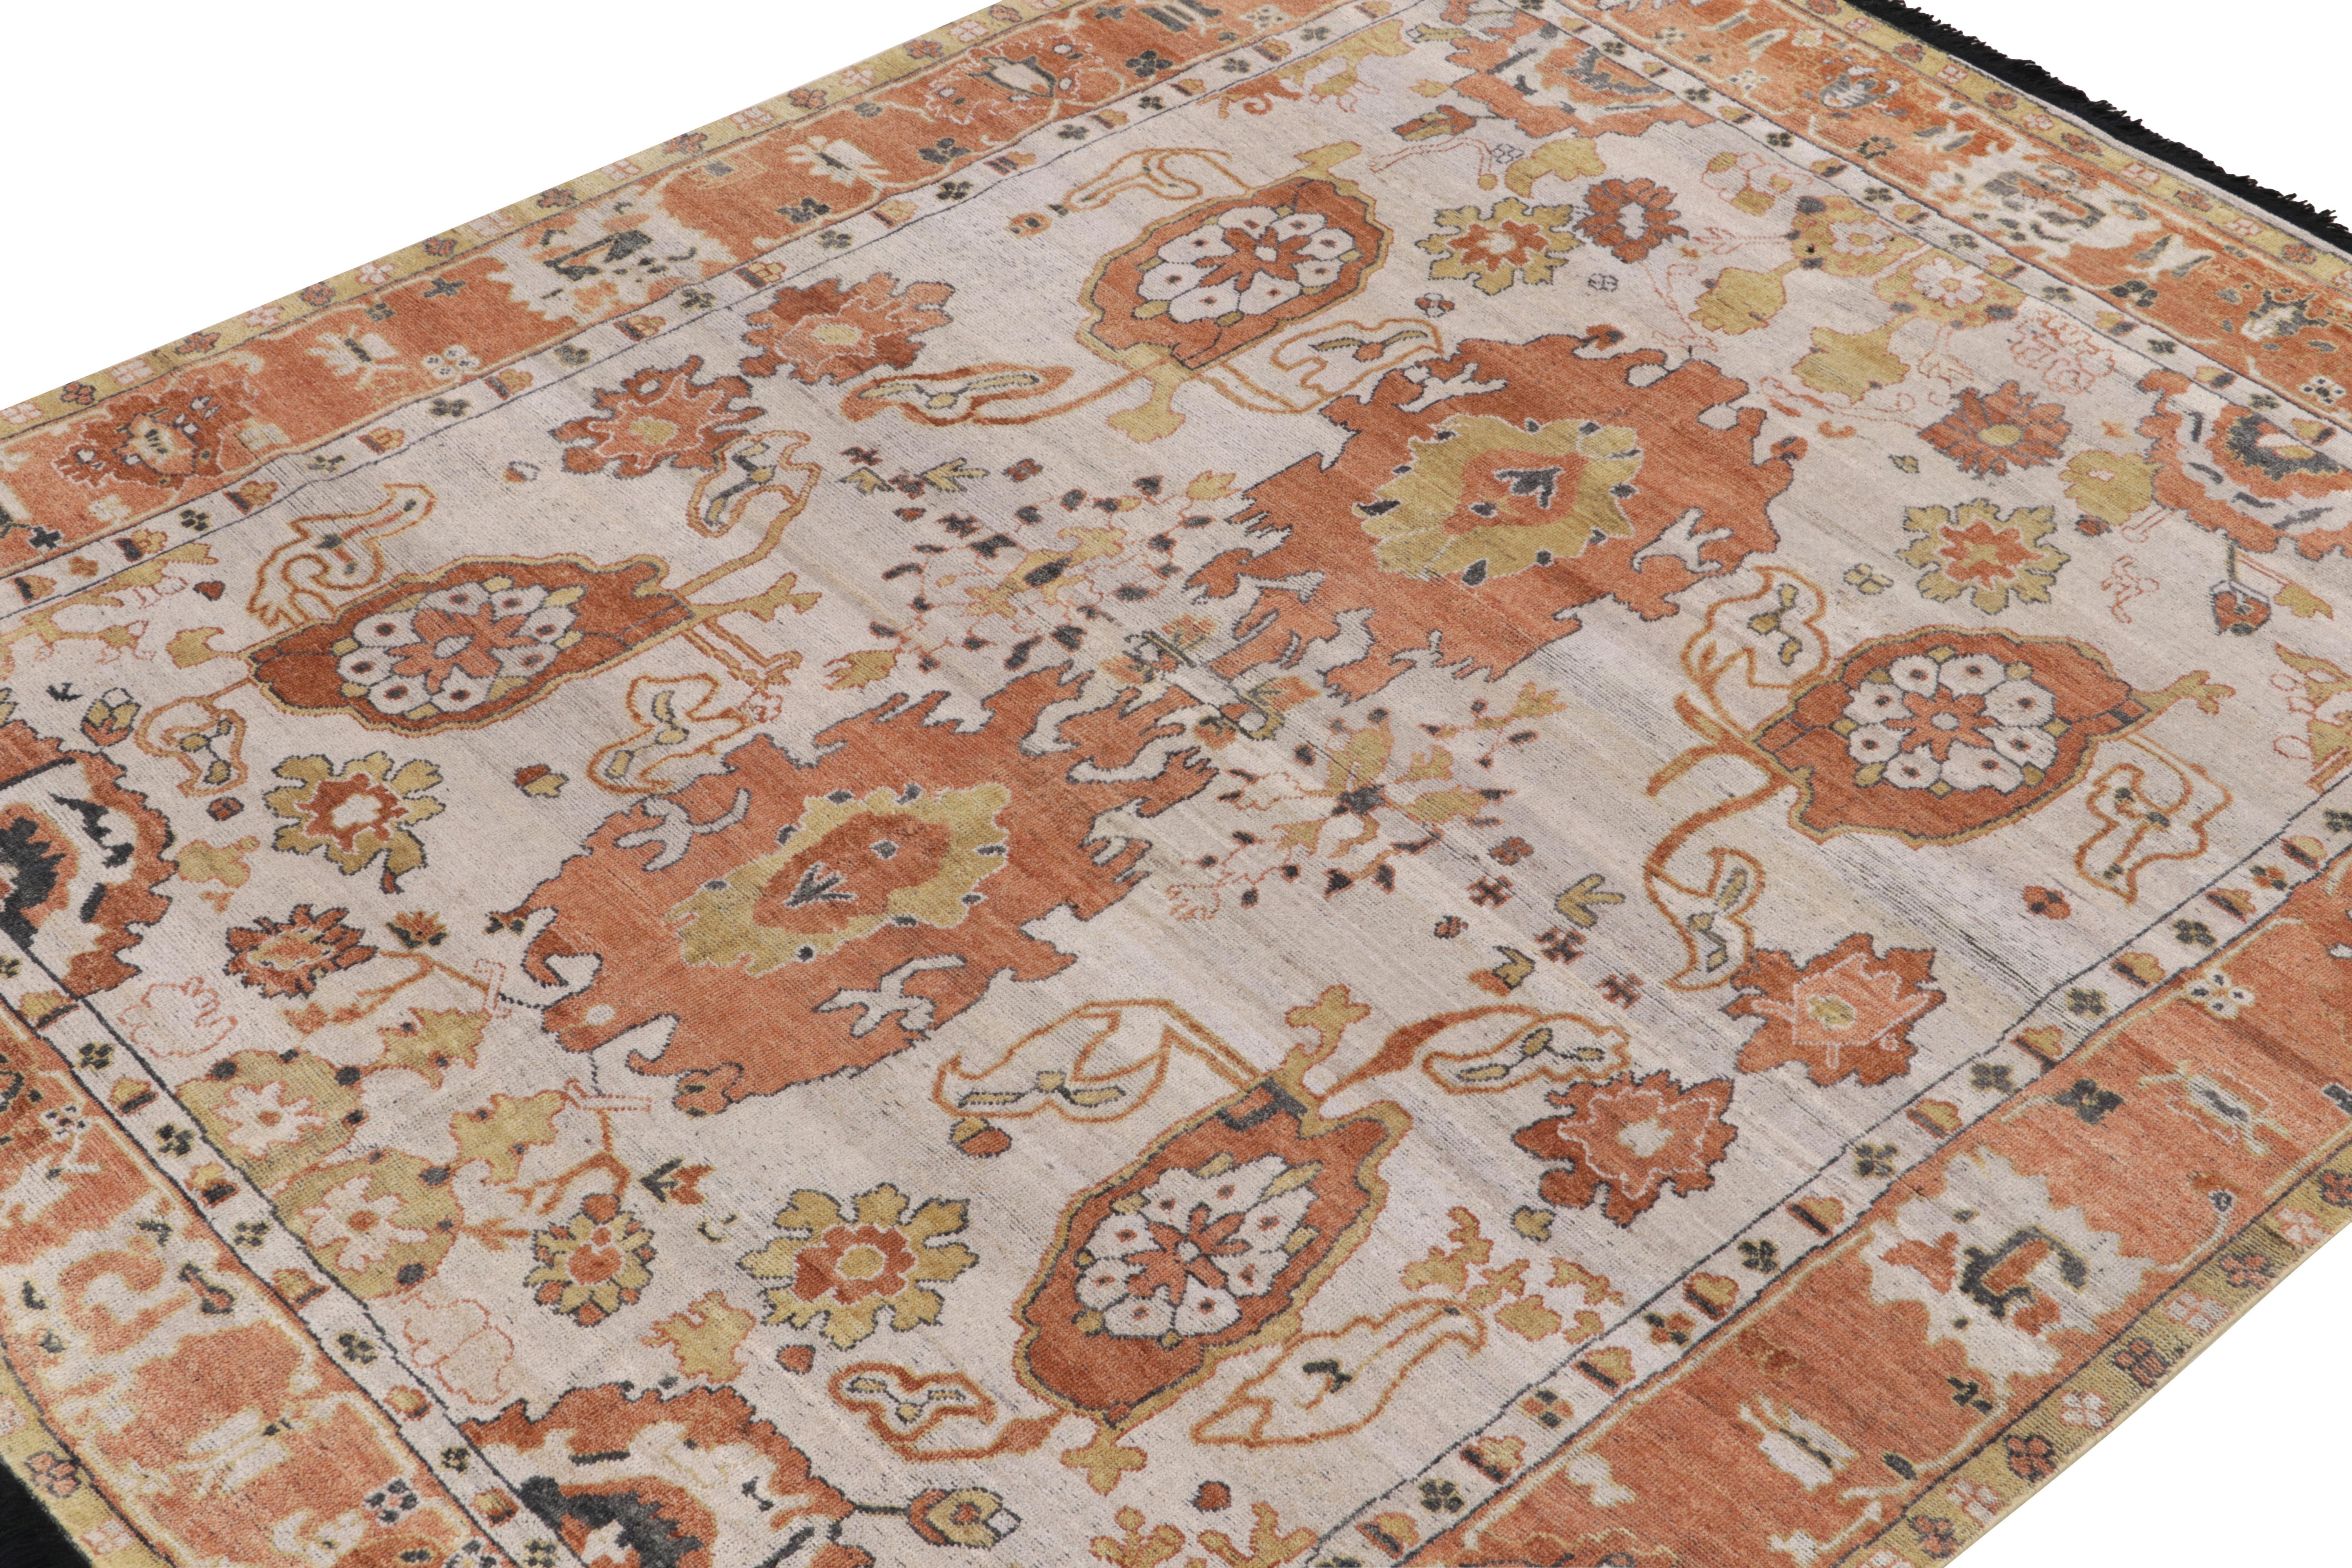 Indian Rug & Kilim's 1900s Oushak Style Rug in White, Orange and Gold Floral Pattern For Sale